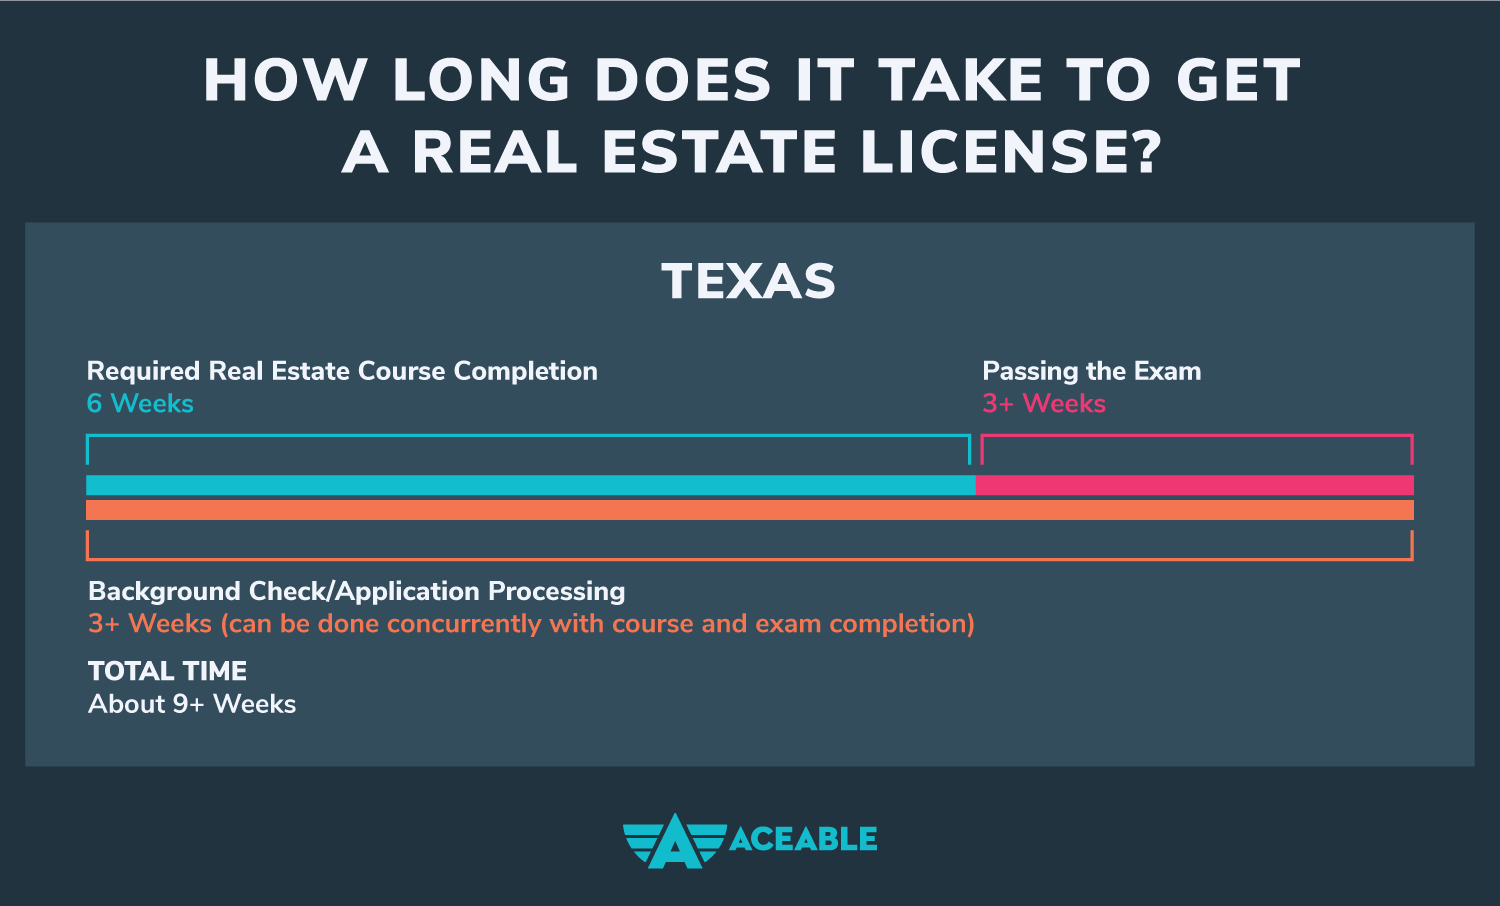 Info graphic of how long it takes to get a real estate license, including the six weeks to take the course and three weeks after course completion to complete a background check, application process, and pass the exam